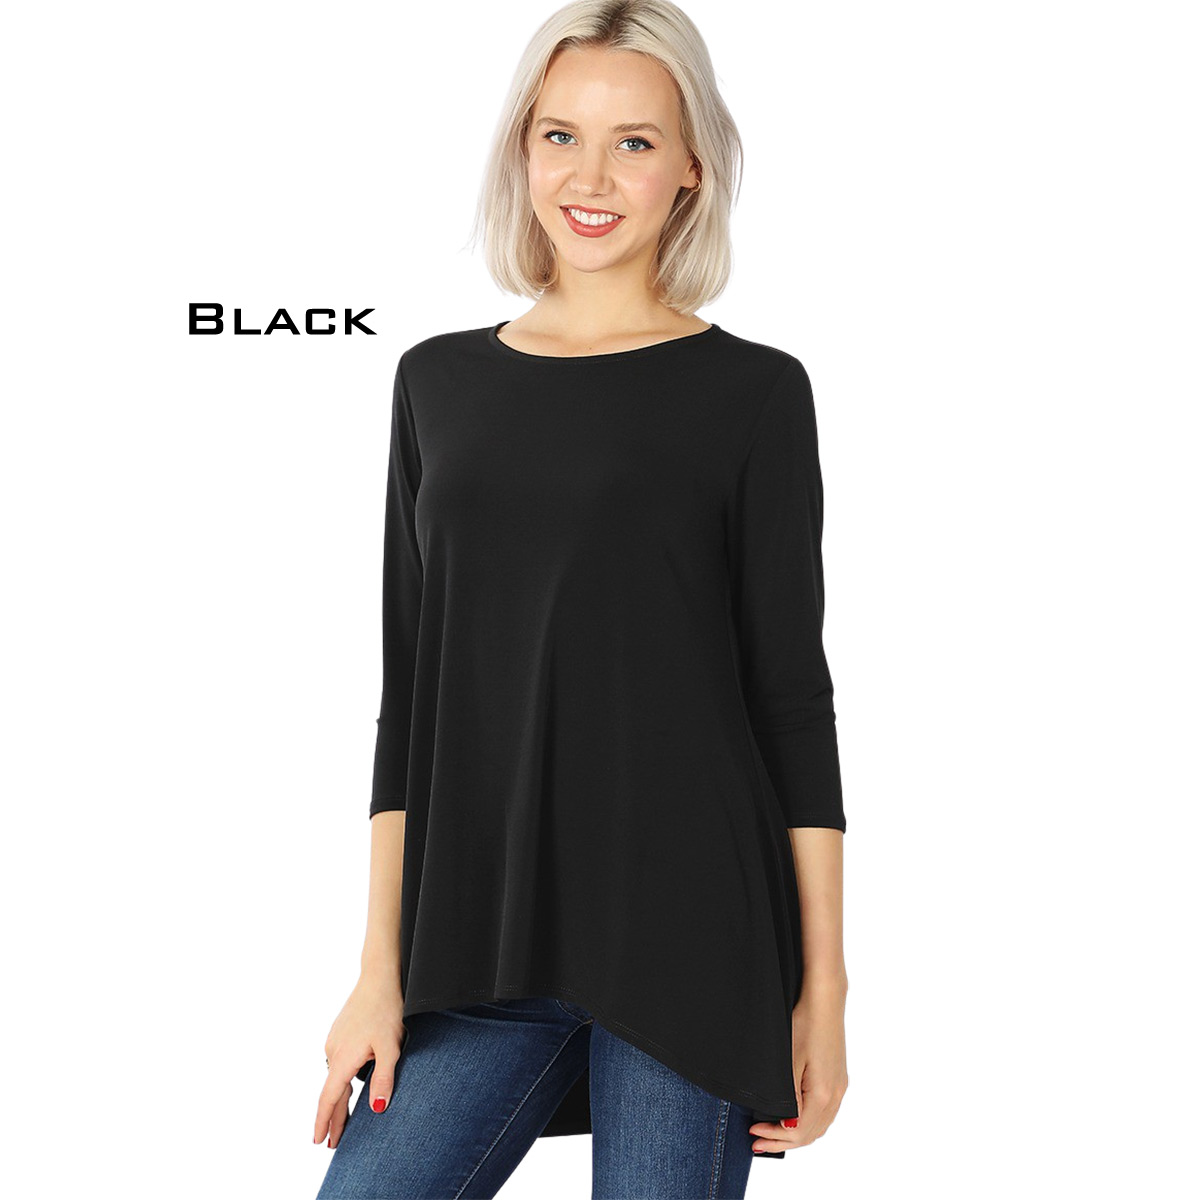 2367 - Ity High-Low 3/4 Sleeve Top BLACK High-Low 3/4 Sleeve Top 2367 - Large